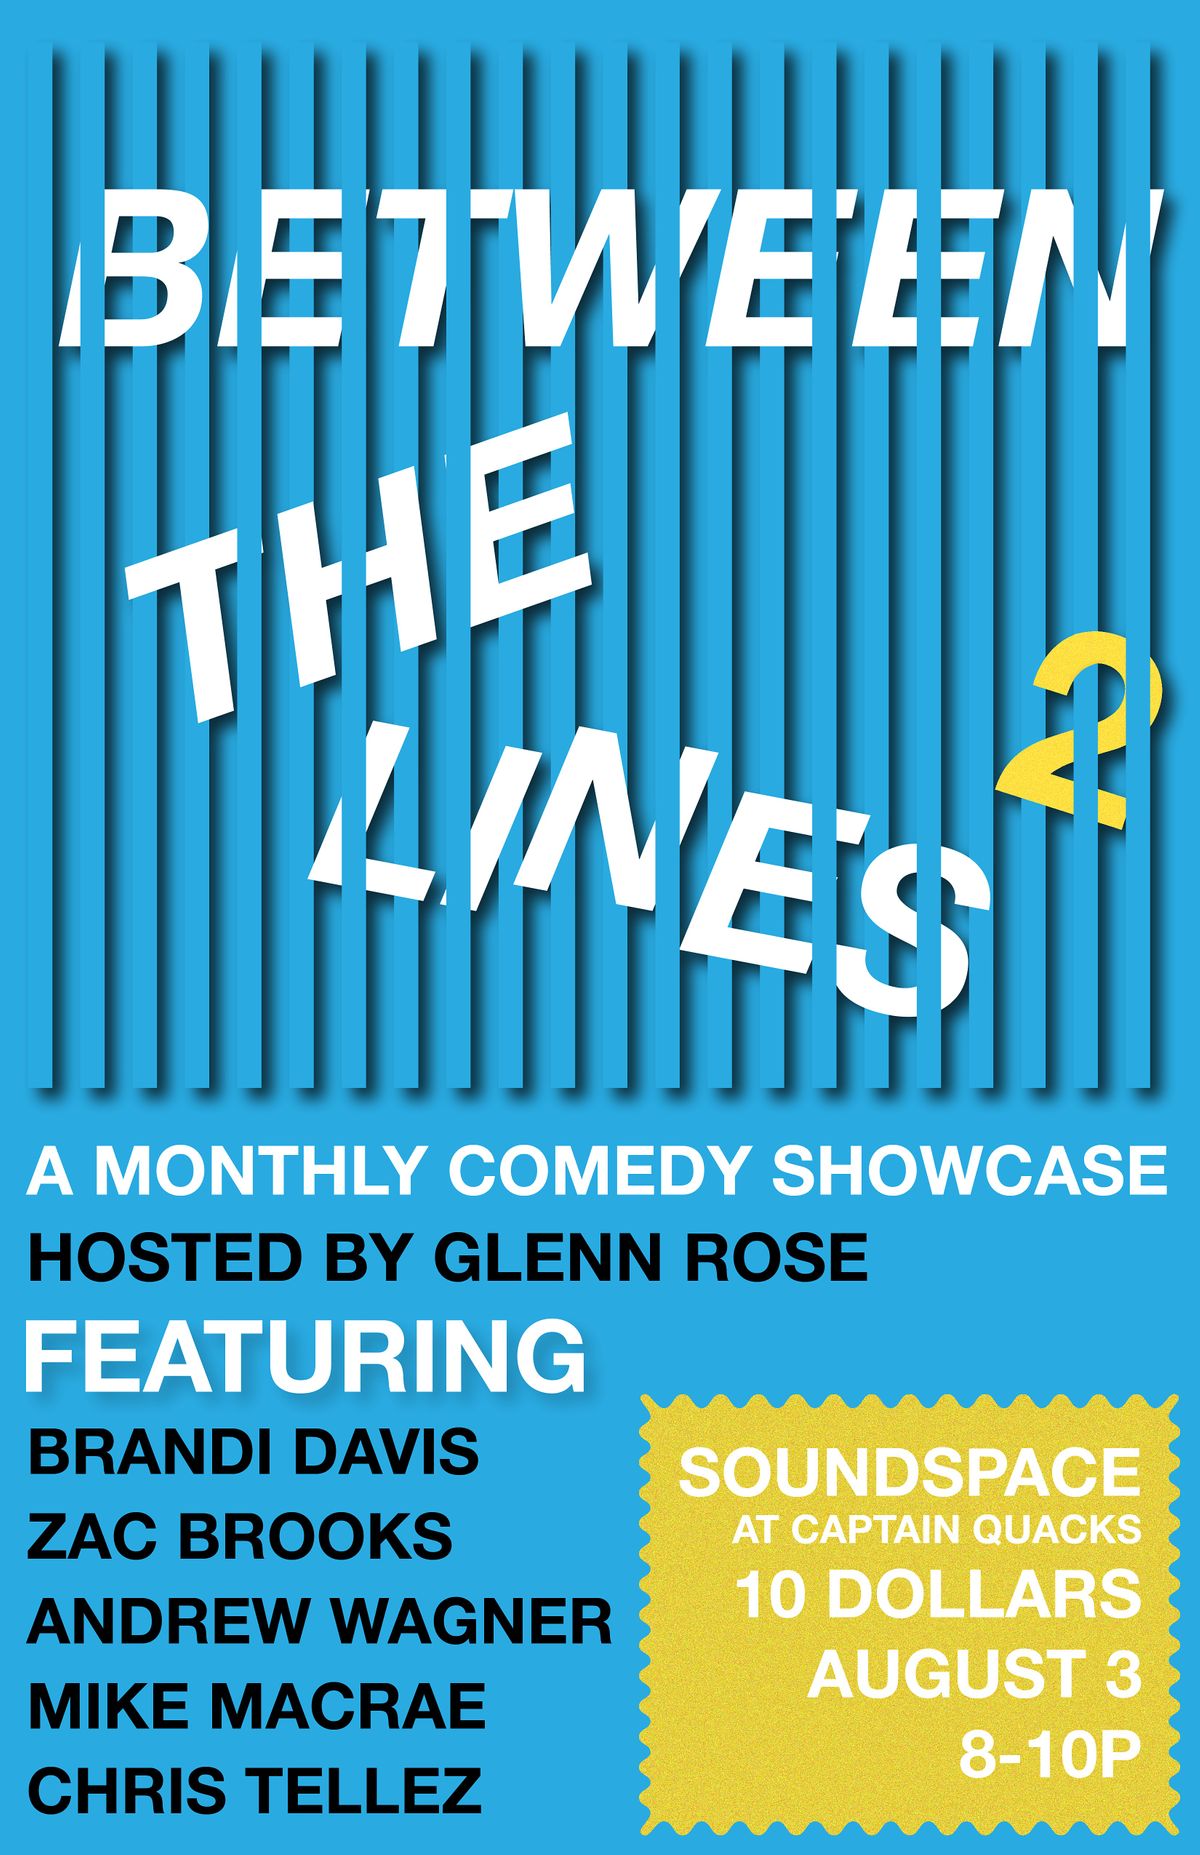 Between The Lines 2: A Comedy Showcase!